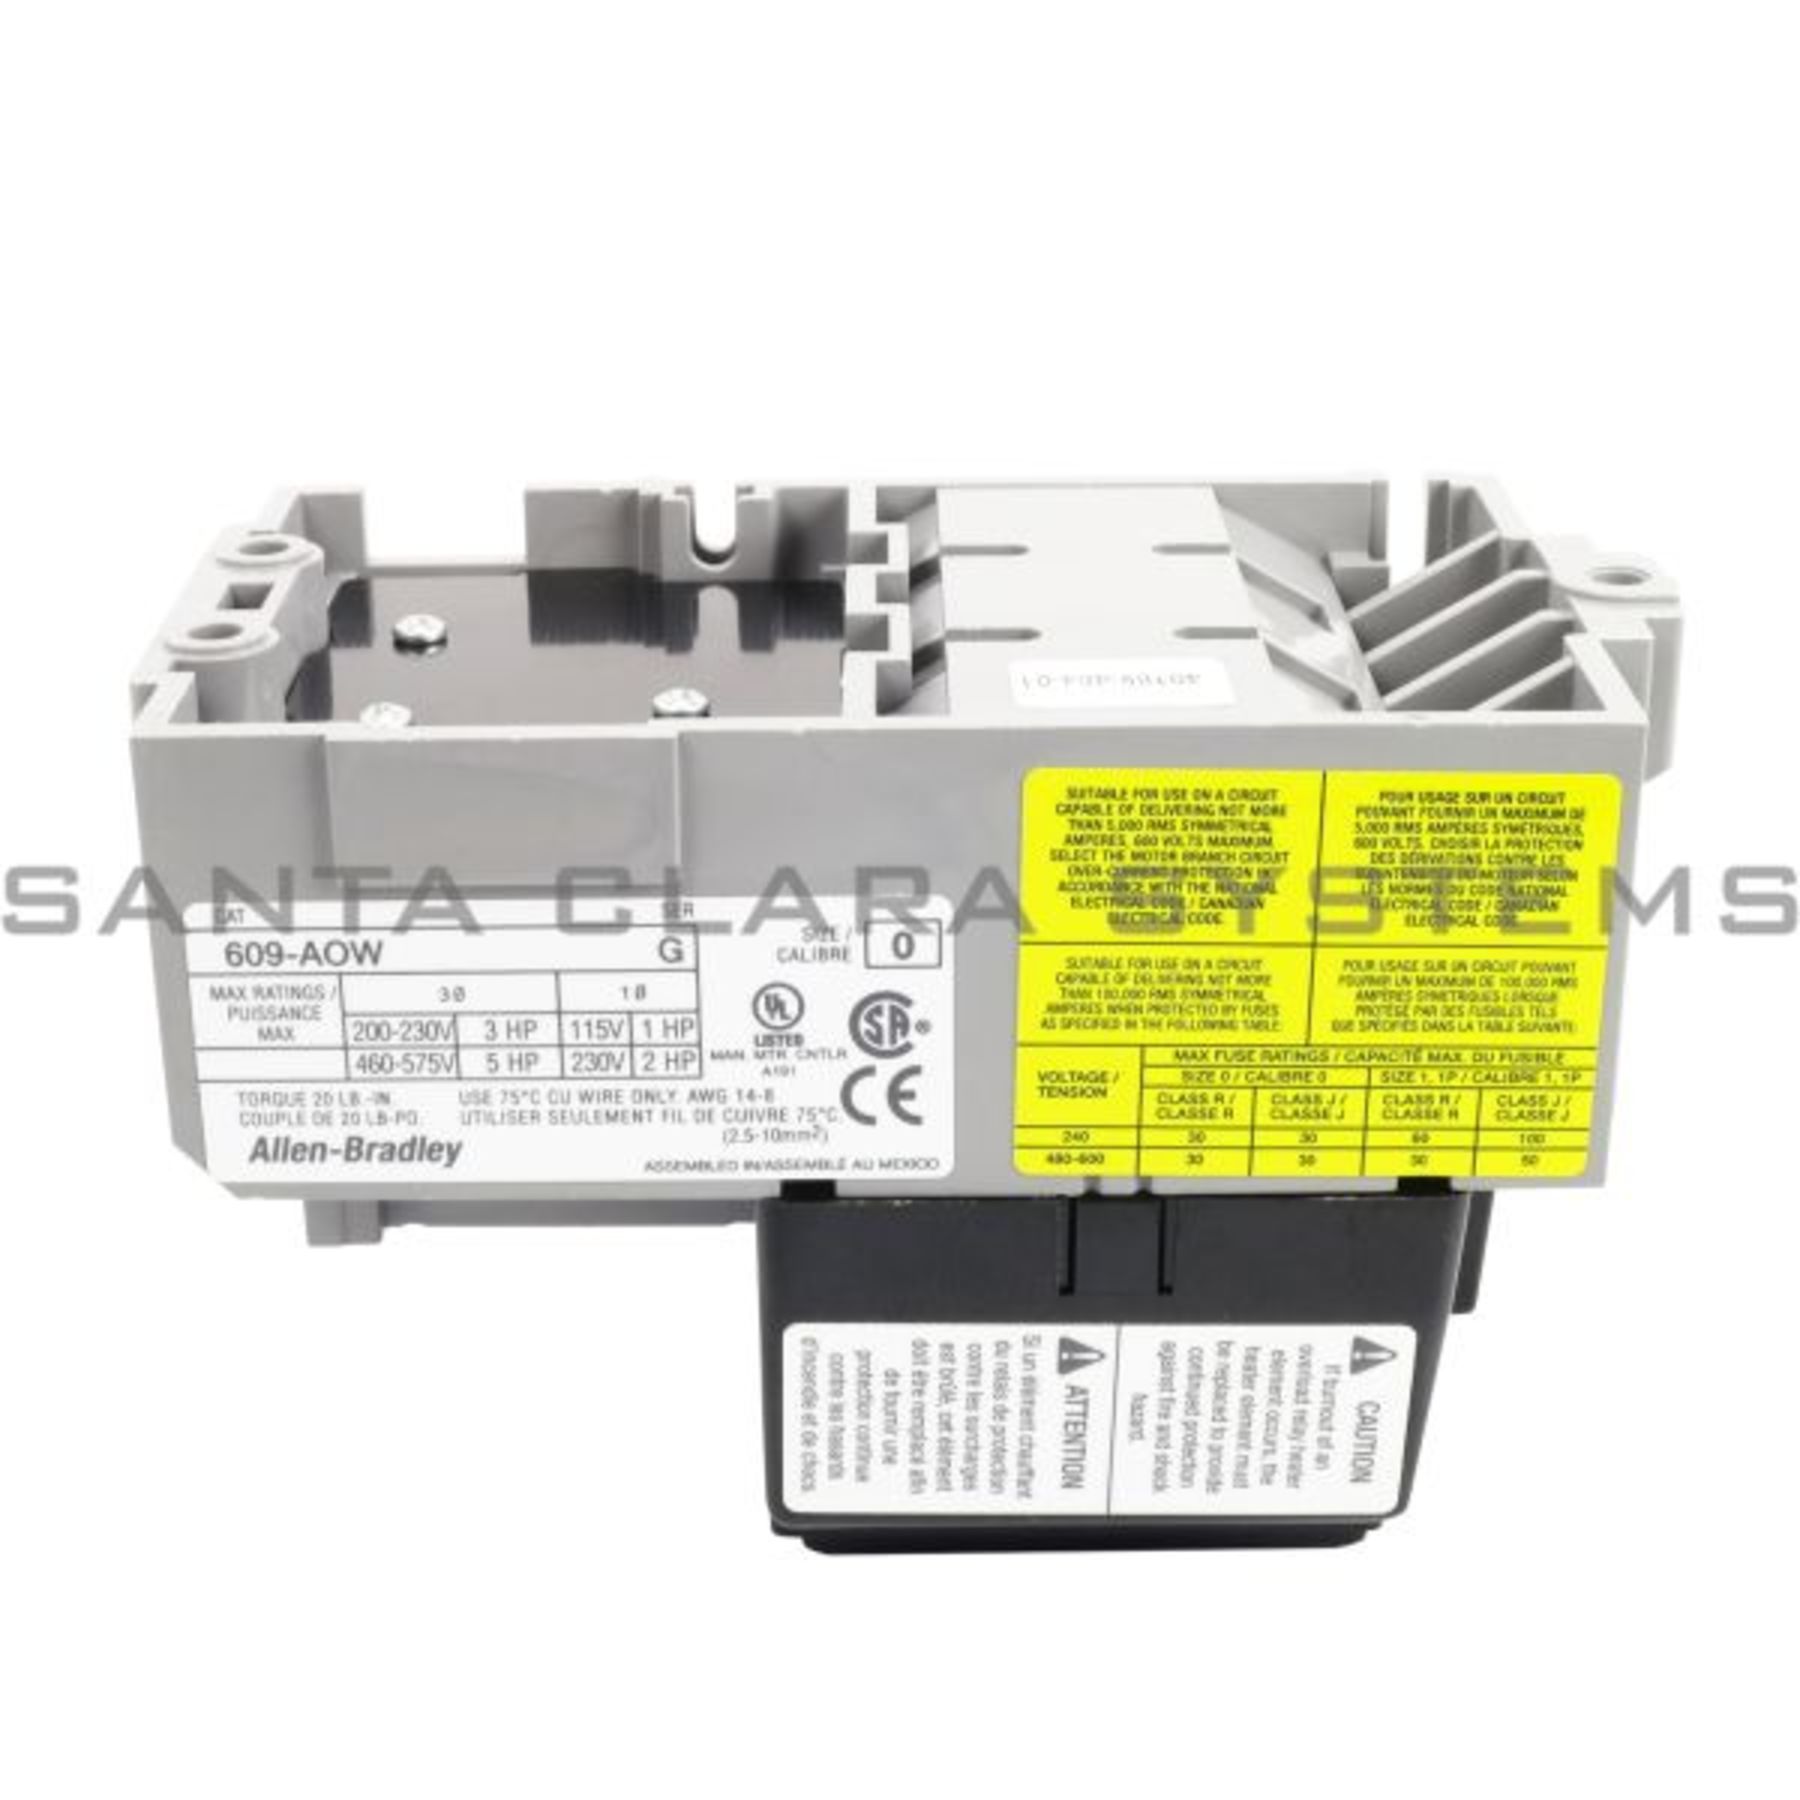 609-AOW Allen Bradley In stock and ready to ship - Santa Clara Systems